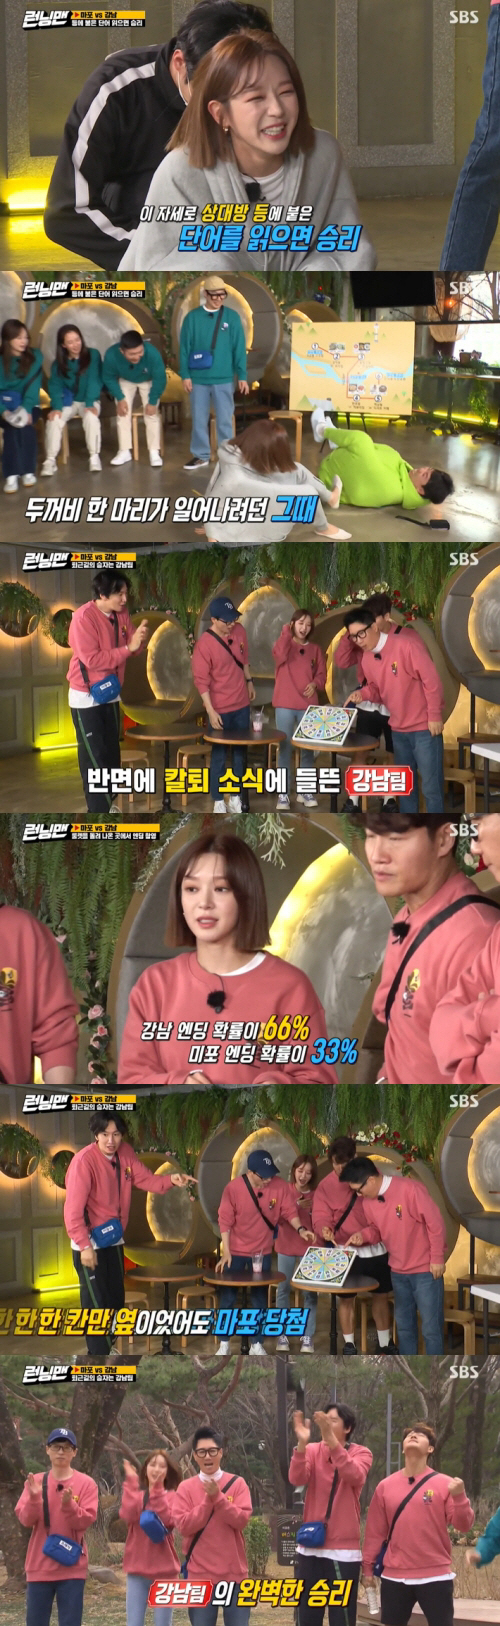 Running Man Jo Se-ho showed off his brilliant dedication as a talk bomber.Park Choa and Jo Se-ho appeared as guests on SBS Running Man broadcast on the 11th.Park Choa said, I will appear in six years.The members also gave Park Choa a generous welcome saying, I wanted to see you.On the other hand, Jo Se-ho, who has a strong relationship with the members, laughed at the appearance of not being welcomed by anyone.In particular, Kim Jong-kook made a joke about Jo Se-ho, who is called candlestick after the diet, saying, I have beaten Jung Jun-ha as a wrong example in the exercise these days.I was a real fan during the cabbage days, he said, expressing his regret for Jo Se-ho, who was slimmer with diet.Jo Se-ho said, Many people want yo-yo, but they actually keep it well.Jo Se-ho told me that he had received a call from Yoo Jae-Suk before shooting on the day, saying, I told him that I was going to Running Man.I said, Do not you want to go out? And then I said, Come out and stay like a doll and go. Kim Jong-kook repeatedly expressed regret that it was more funny to talk about the same thing in the past, and Jo Se-ho laughed and laughed, The object should not do that.On the other hand, in Running Man, Yoo Jae-suk, Ji Suk-jin, Kim Jong-kook, Lee Kwang-soo, Park Choa were divided into Gangnam District Team, Haha, Song Ji-hyo, Jeon So-min, Yang Se-chan and Jo Se-ho were divided into DJ Maphorisa Team. Hahas Sweet and bloody work route Race unfolded.This race starts at the middle of the two regions and moves one step closer to the team area that won the mission.Thanks to the team Kim Jong-kook of Gangnam District, which won first place in the pre-mission, the first mission place was decided to be Banpo Tteokbokki.The Park Choa look got better - its brighter than it used to be, the members said in the car moving to the mission site.Yoo Jae-Suk then asked, How about when you are playing the team and when you are alone? Park Choa replied, The advantage can reduce shop time; originally, I waited for two teams.The members who arrived at the mission site then played a quiz showdown with the first mission.The Gangnam District team, which included brains such as Yoo Jae-Suk, Kim Jong-kook and Ji Suk-jin, was delighted at the word quiz, but DJ Maphorisas team was devastated.In a quiz showdown that matches various unit symbols, DJ Maphorisa team as well as Gangnam District team were also struggling.With the wrong answer in the air, Haha hurriedly shouted to his son who was watching the broadcast, Stop the hard drive TV. Do your homework. Write a diary.Also unlike usual, Yoo Jae-Suk also had a misrepresentation parade, so Haha said, Gihodo turn off the TV, and Yoo Jae-Suk said, No, look.My dad works so hard. In the next initial quiz showdown, the Gangnam district team except Kim Jong-kook showed a weak figure.In the end, the victory was won by DJ Maphorisa, and Roulette Khan also secured an additional.With DJ Maphorisas victory setting the next mission venue as a Dongbing Go-dong, Yoo Jae-Suk unexpectedly invited Jo Se-ho to talk in a moving car.Jo Se-ho continued to feel sorry for my nickname is a talk bomber, but Kim Jong-kook continued to say, I lost weight and I lost a lot of sense.In the end, Jo Se-ho said, Is Kim Jong-kook a good fight? And Haha laughed, saying, I saw it 7:1.Jo Se-ho then started Disclosure on Lee Kwang-soo, who attends the same gym.Jo Se-ho, who perfectly depicts Lee Kwang-soo, who struggles with a distorted expression, said, It was like weighing a weight that should not be done.Seriously, which baffled Lee Kwang-soo; also, Lee Kwang-soo disclosured Yoo Jae-Suks top star prick.If Jae-seok is a Seho brother (at the gym) or I am there, he comes and points out, What are your pants? And when he meets someone like Gong Yooo, his lips are dried up, he said.Yoo Jae-Suk was embarrassed, but Gong Yoo is my brother Stephanie Herseth Sandlin laughed.The second mission at the Dongbinggo-dong Korean restaurant was to sit on the average and attack the other person with a pillow.Kim Jong-kook smiled with a smile when he said the pillow fight was a mission.The commission was also carried out in the strong protest of DJ Maphorisas team, and as expected, the Gangnam District team with Kim Jong-kook won.Both teams, who moved back to Gangnam District, each baked a shell in a private furnace and conducted a mission in which the team with the unopened shells was defeated until the end.Lee Kwang-soo, Jo Se-ho, and Haha remained until the end of the match, and Jo Se-hos scallop did not open up until the end, so the Gangnam District team won again.At the last place, Yeoksam-dong dessert cafe, a victory was made when you read the words attached to your opponent first.Just before the end of the mission, Park Choa won a dramatic victory, and the Gangnam District team won the victory, and the Gangnam District team, which won a lot of roulette compartments in the final ending place lottery, was selected and decided to be Gangnam District Ending.